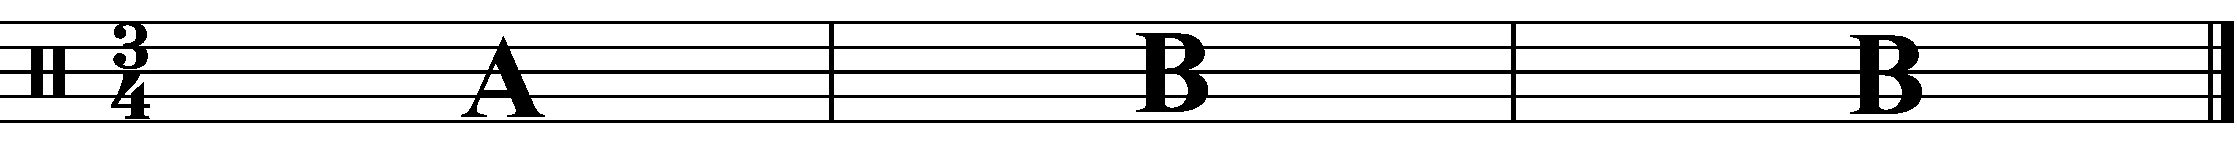 A three bar phrase made up of 2 different sections in the time signature of 3/4.